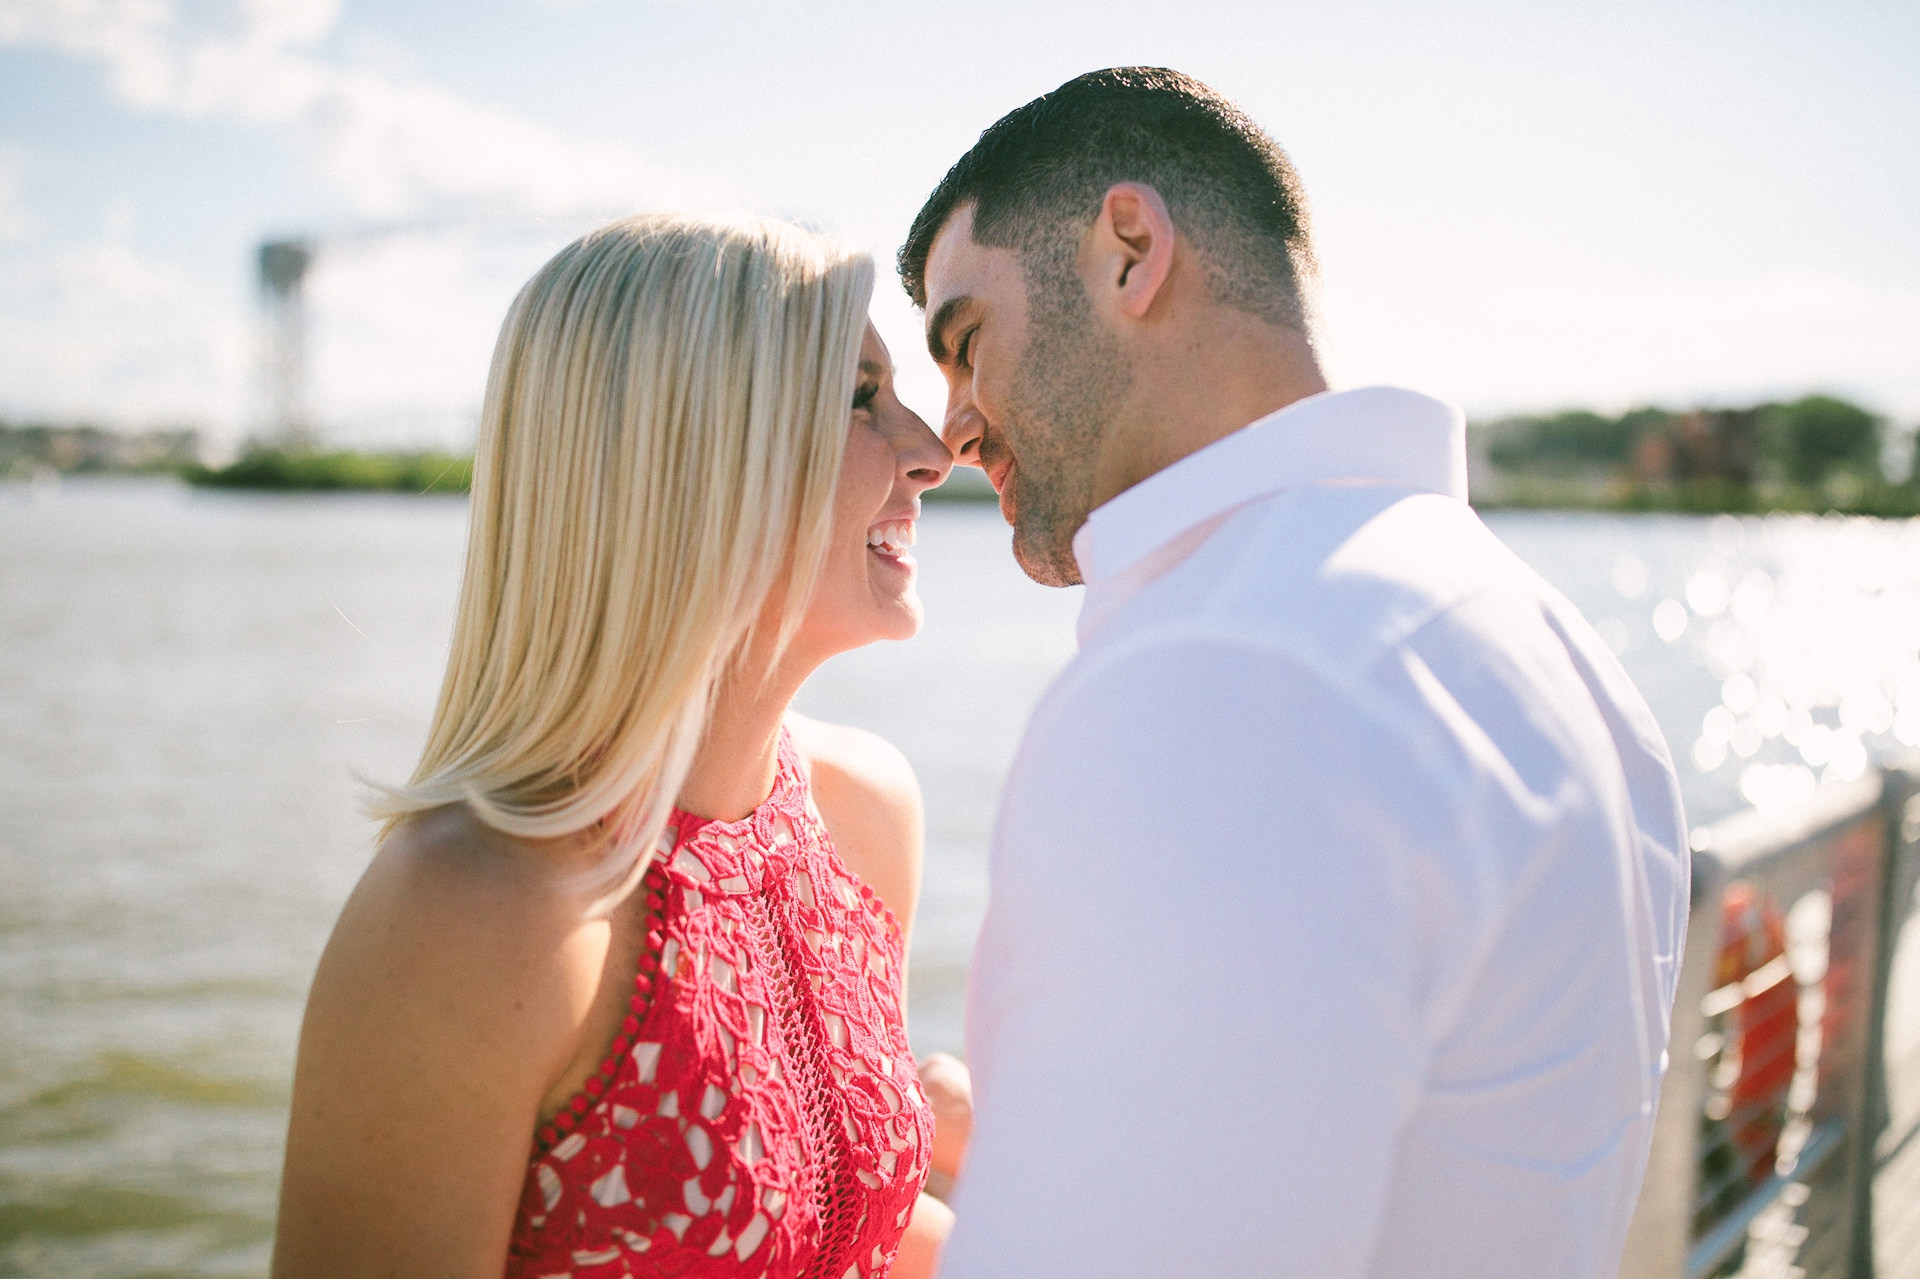 Sara Shookman Angelo DiFranco Engagement photos in cleveland by too much awesomeness photography 1.jpg